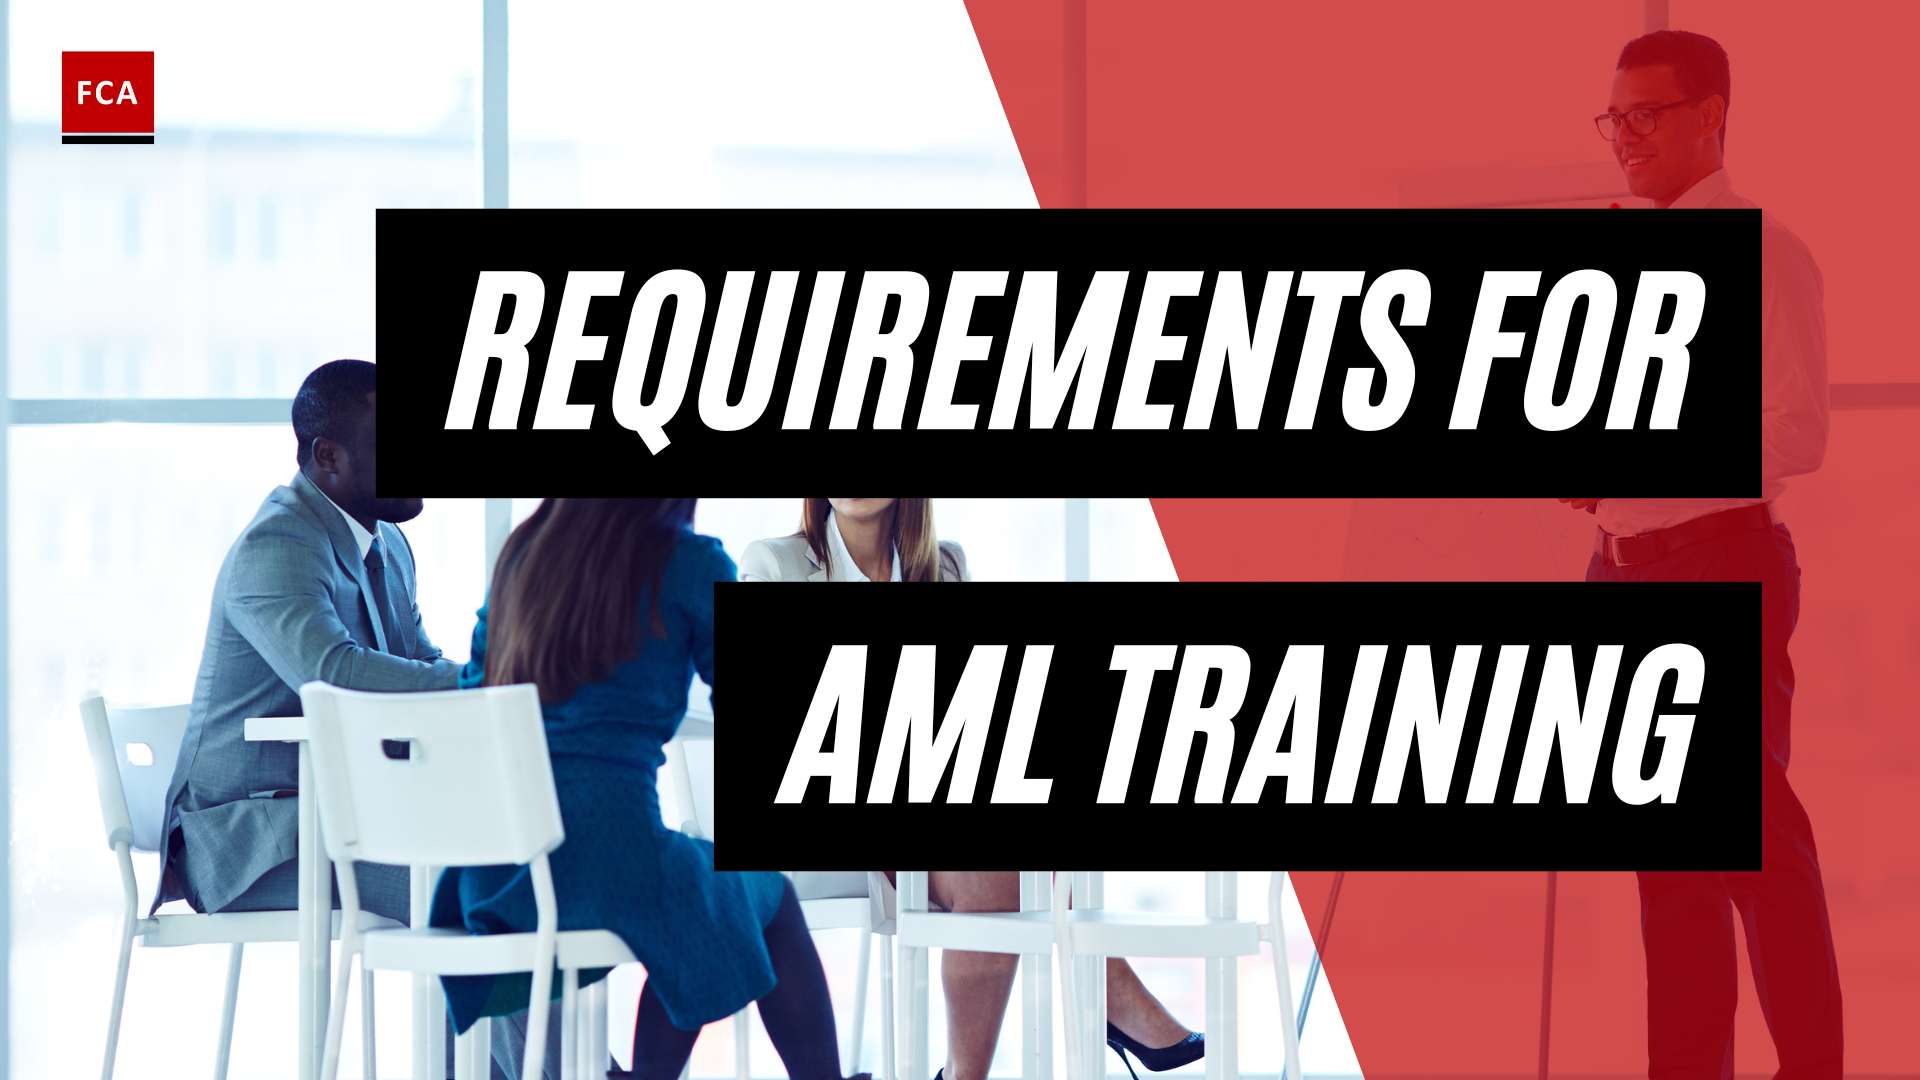 Staying Ahead Of The Game: Understanding Regulatory Requirements For Aml Training